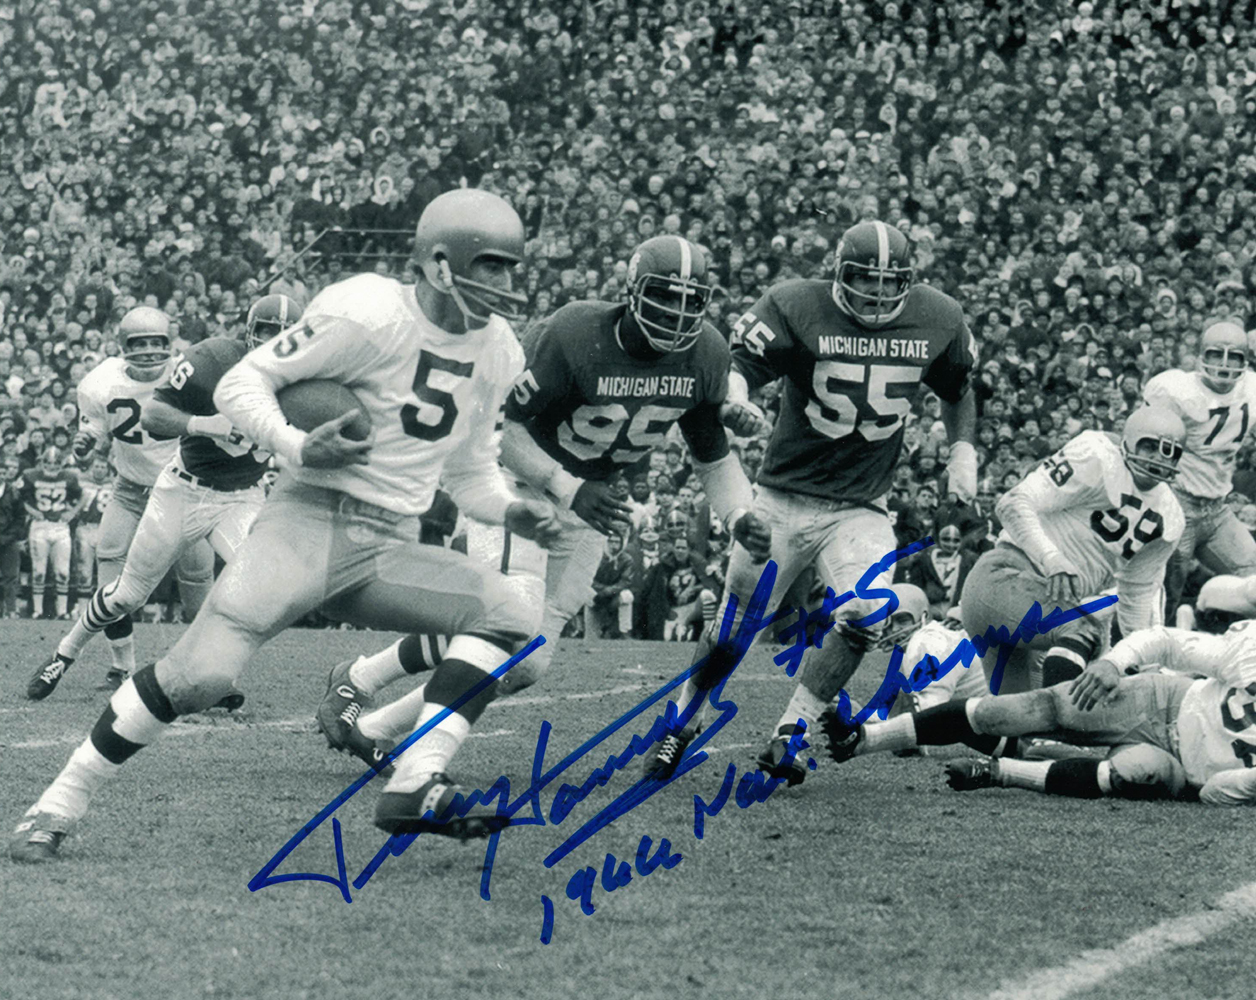 Terry Hanratty Signed Notre Dame Fighting Irish 8x10 Photo 1966 Champs 27838